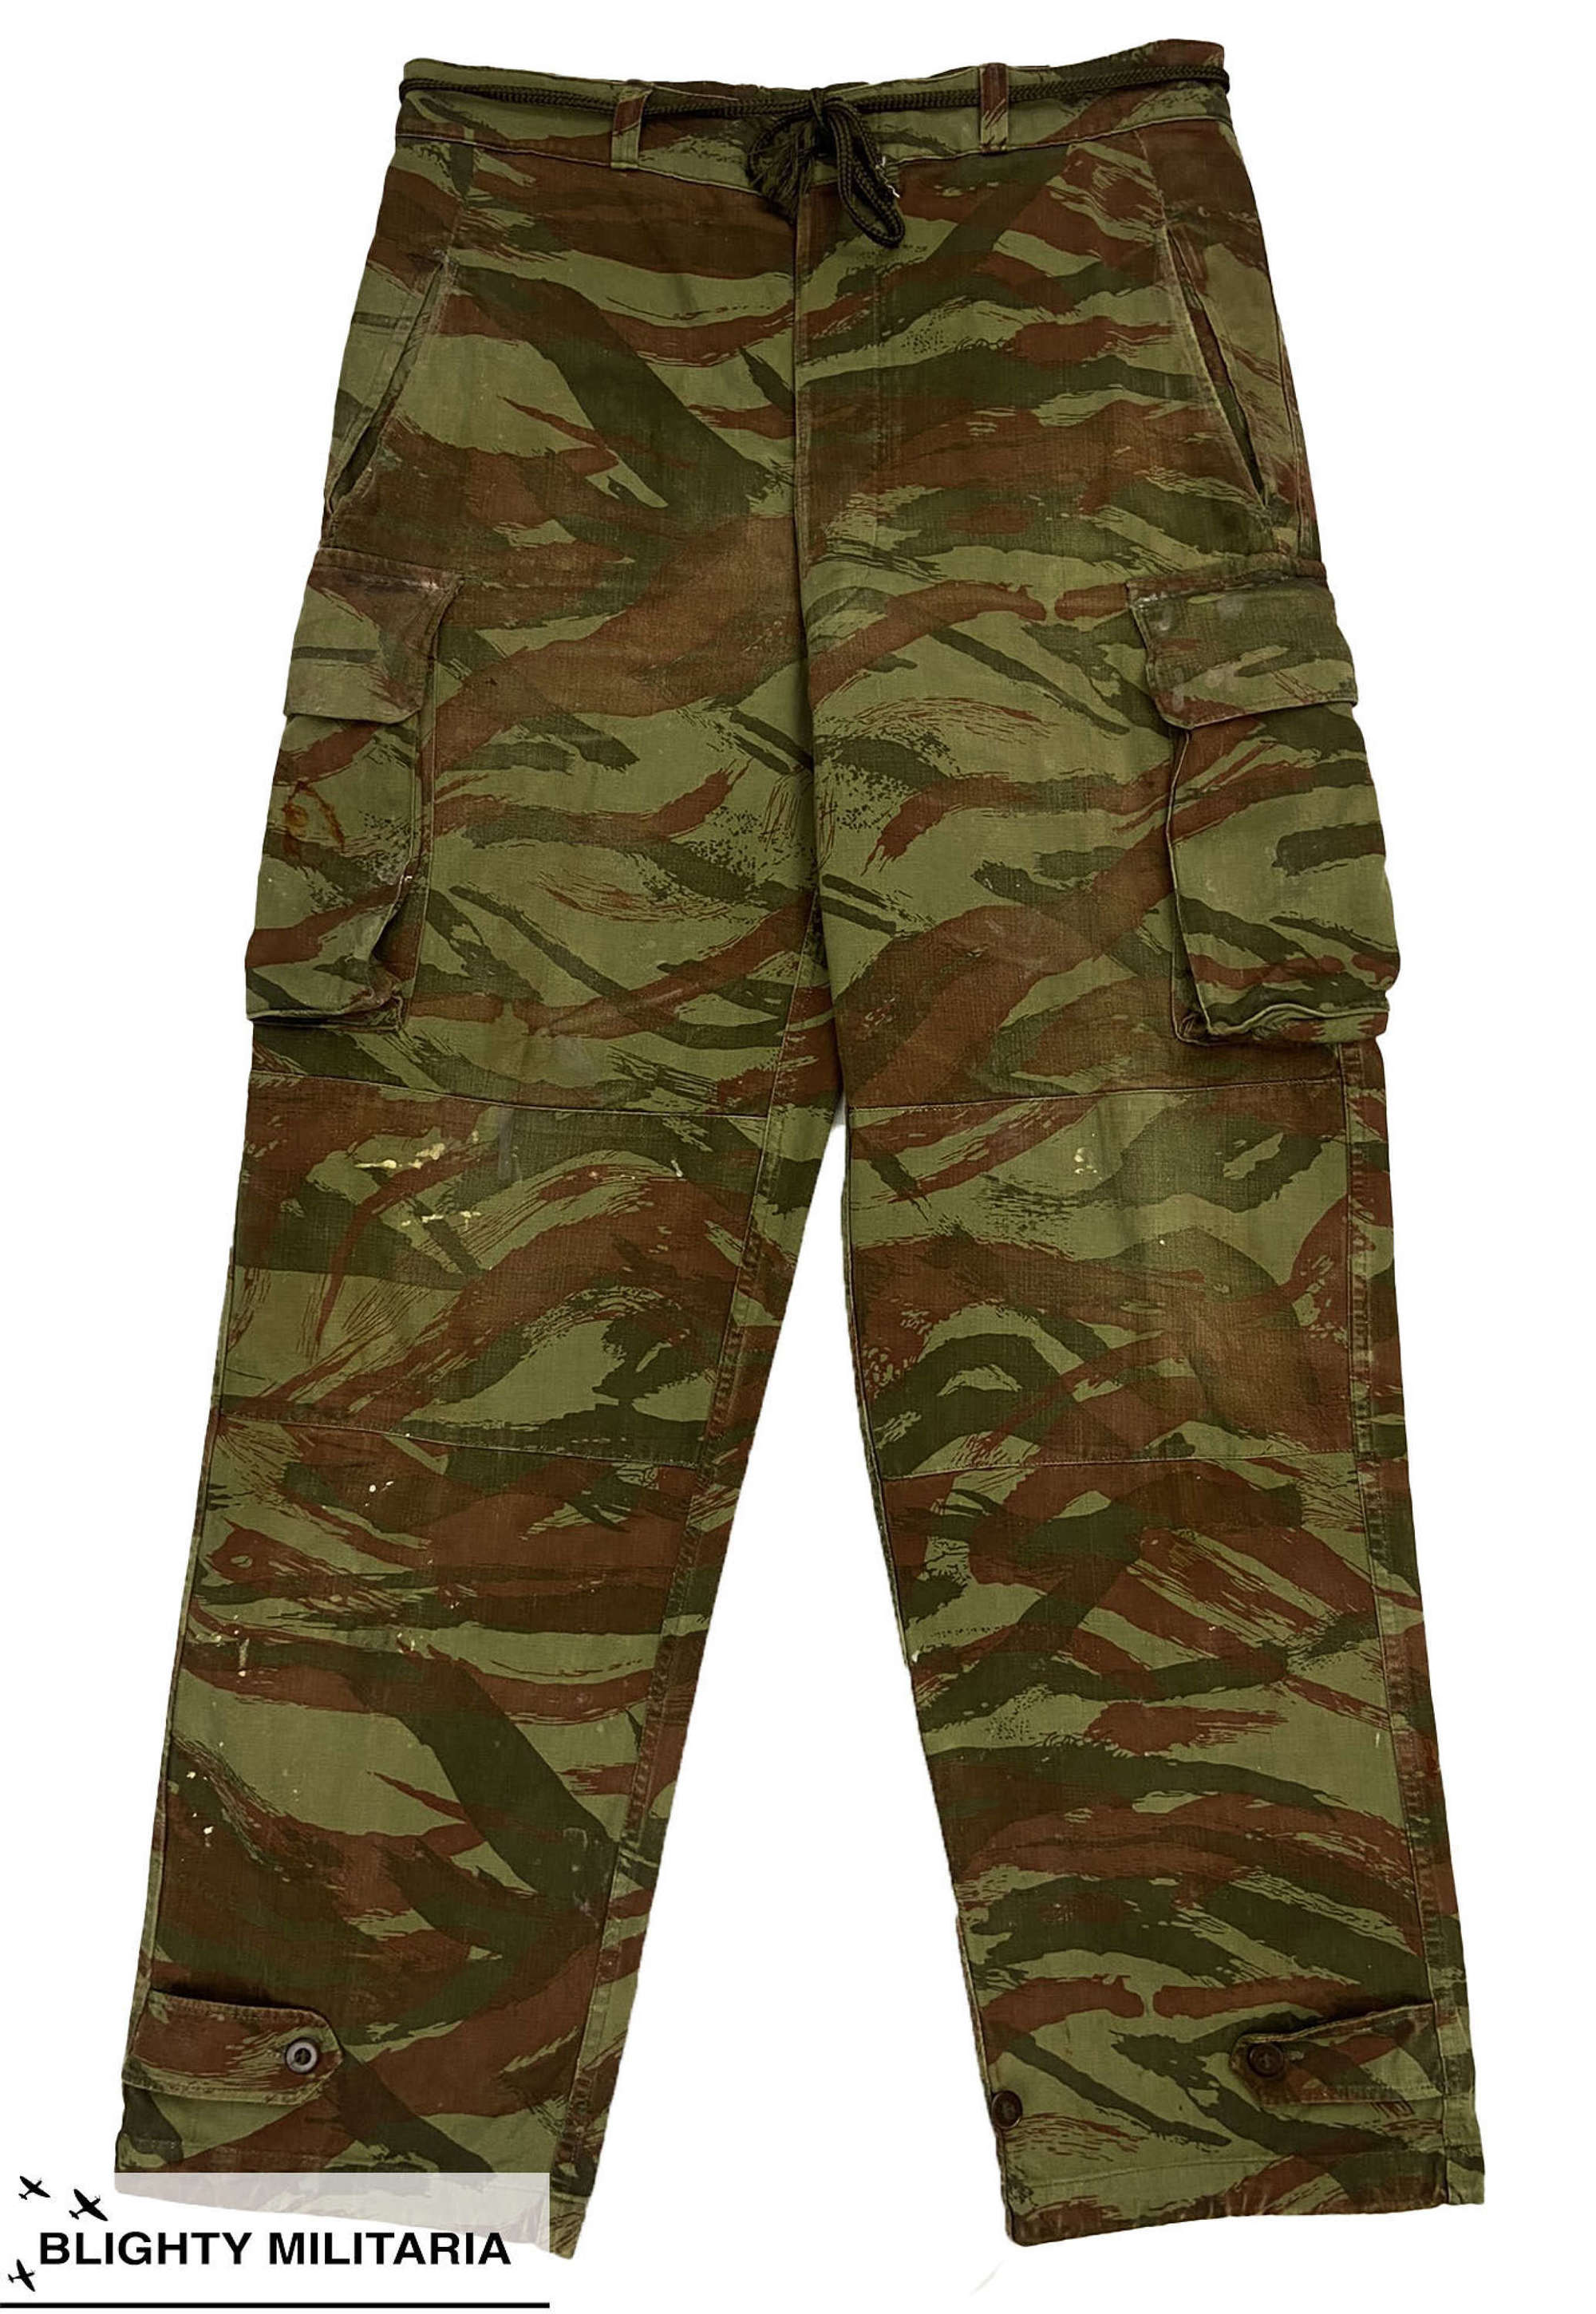 Original 1950s French Army M47 Lizard Camouflage Trousers - Size 34